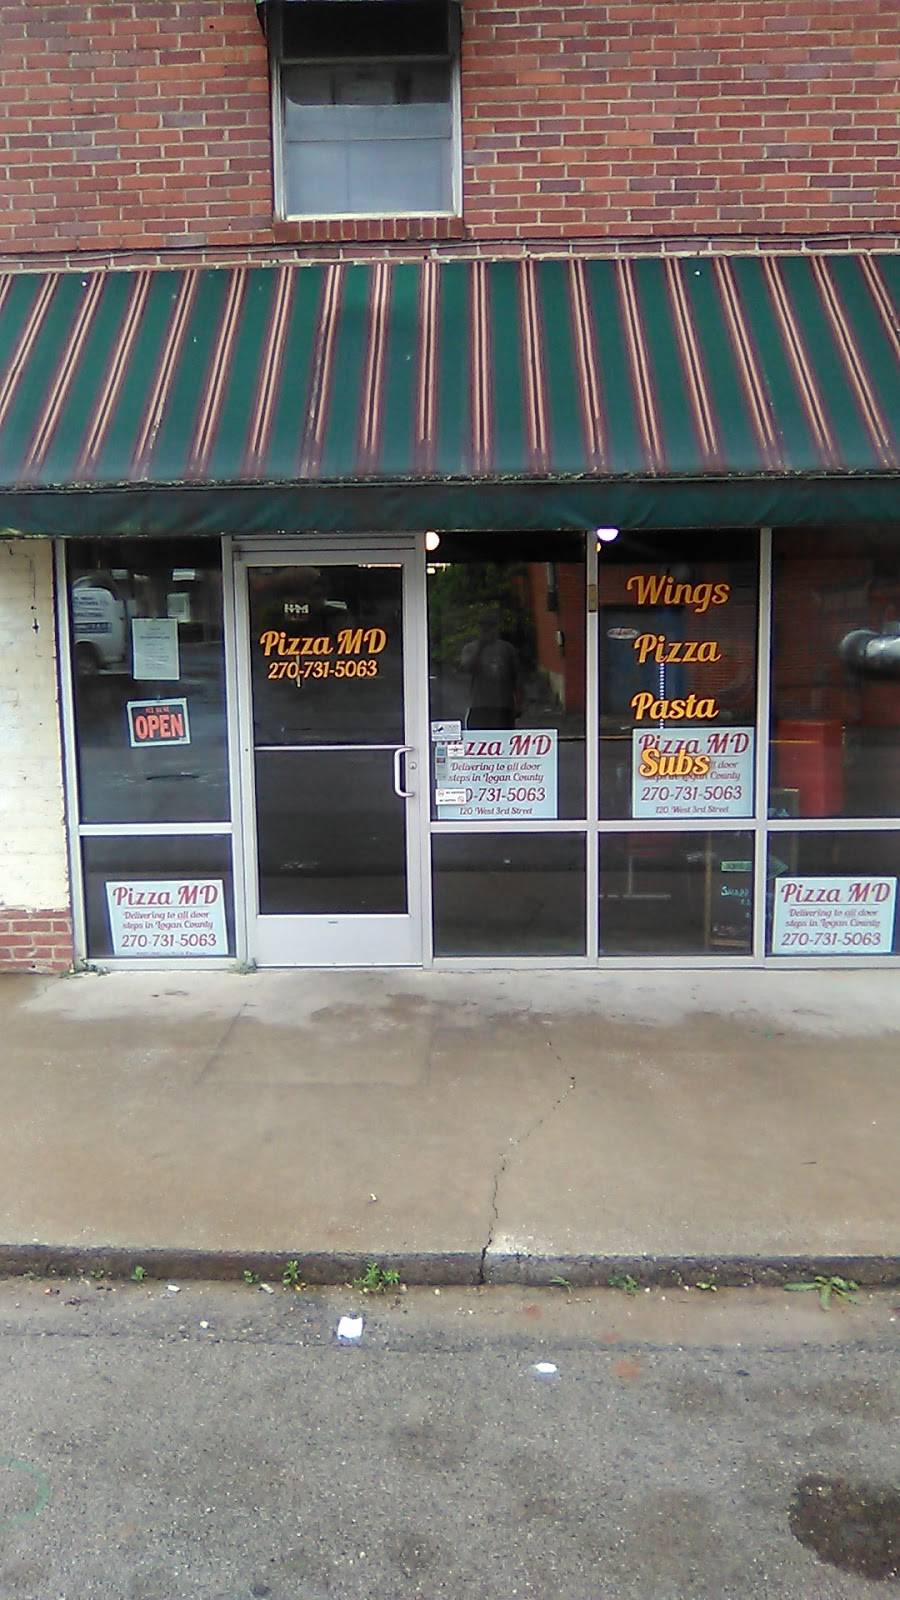 Pizza MD | restaurant | 120 E 3rd St, Russellville, KY 42276, USA | 2707315063 OR +1 270-731-5063